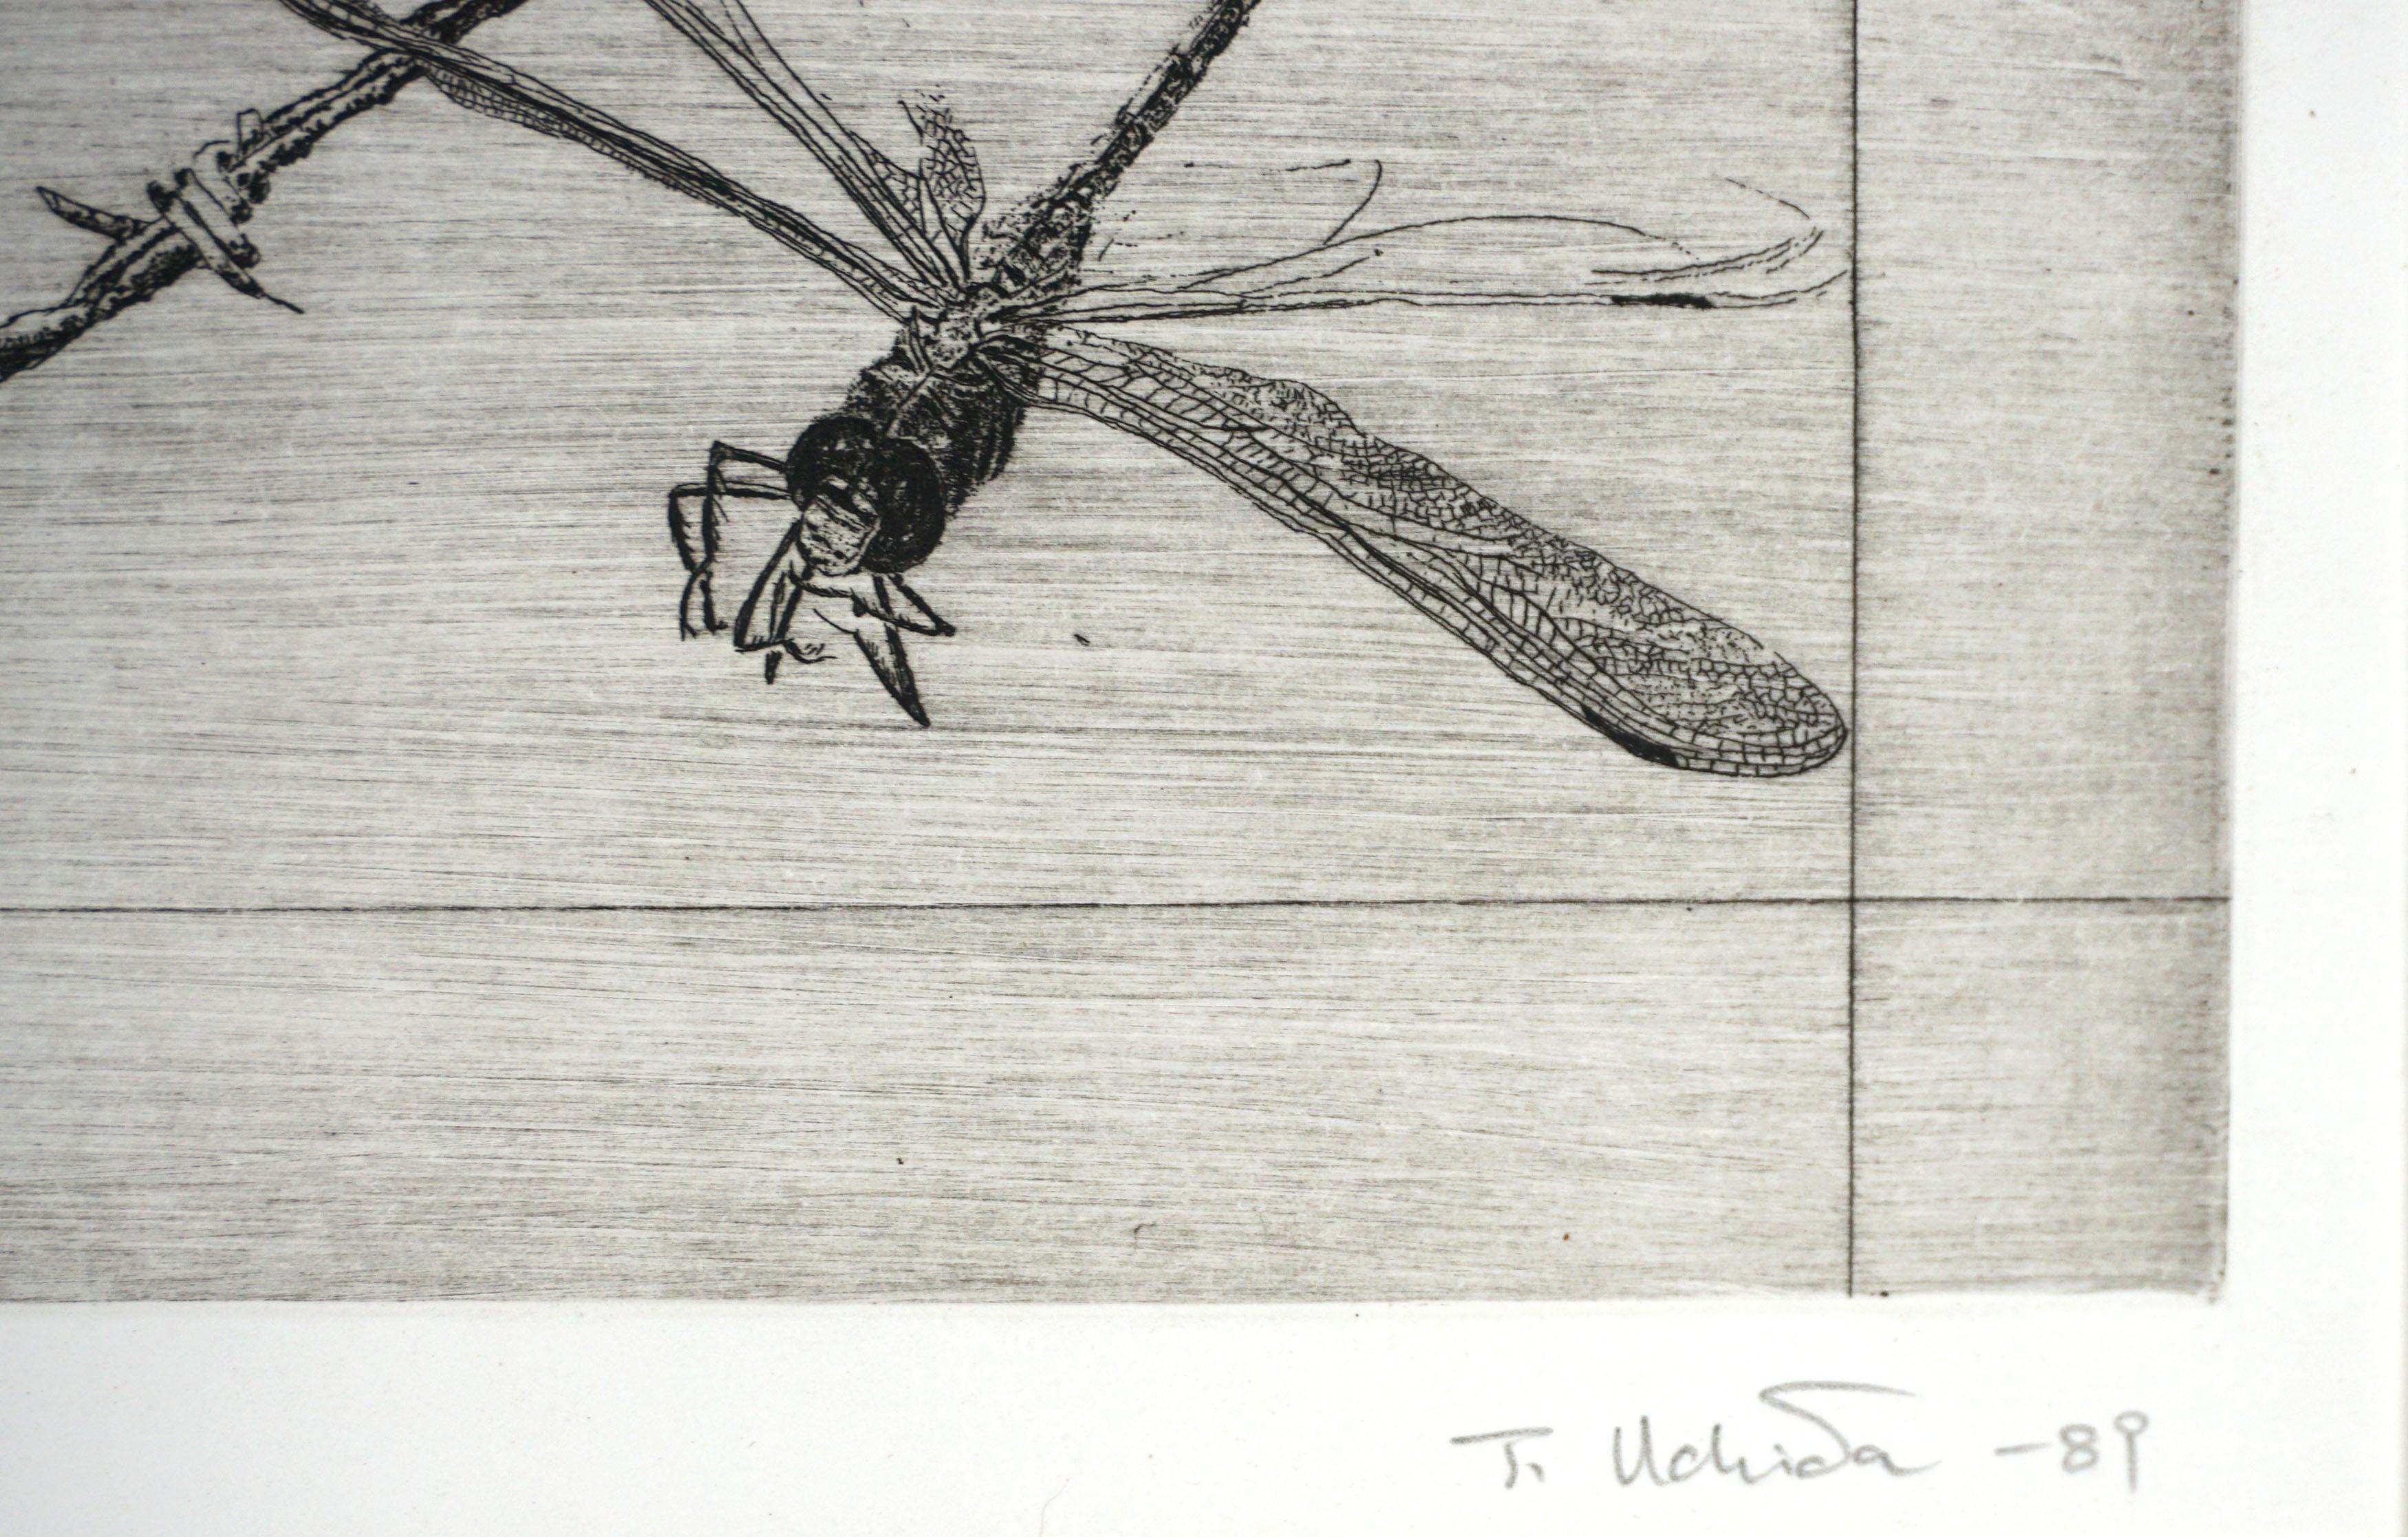 Wonderful and evocative abstracted dry point etching of dragon fly and barbed wire titled 